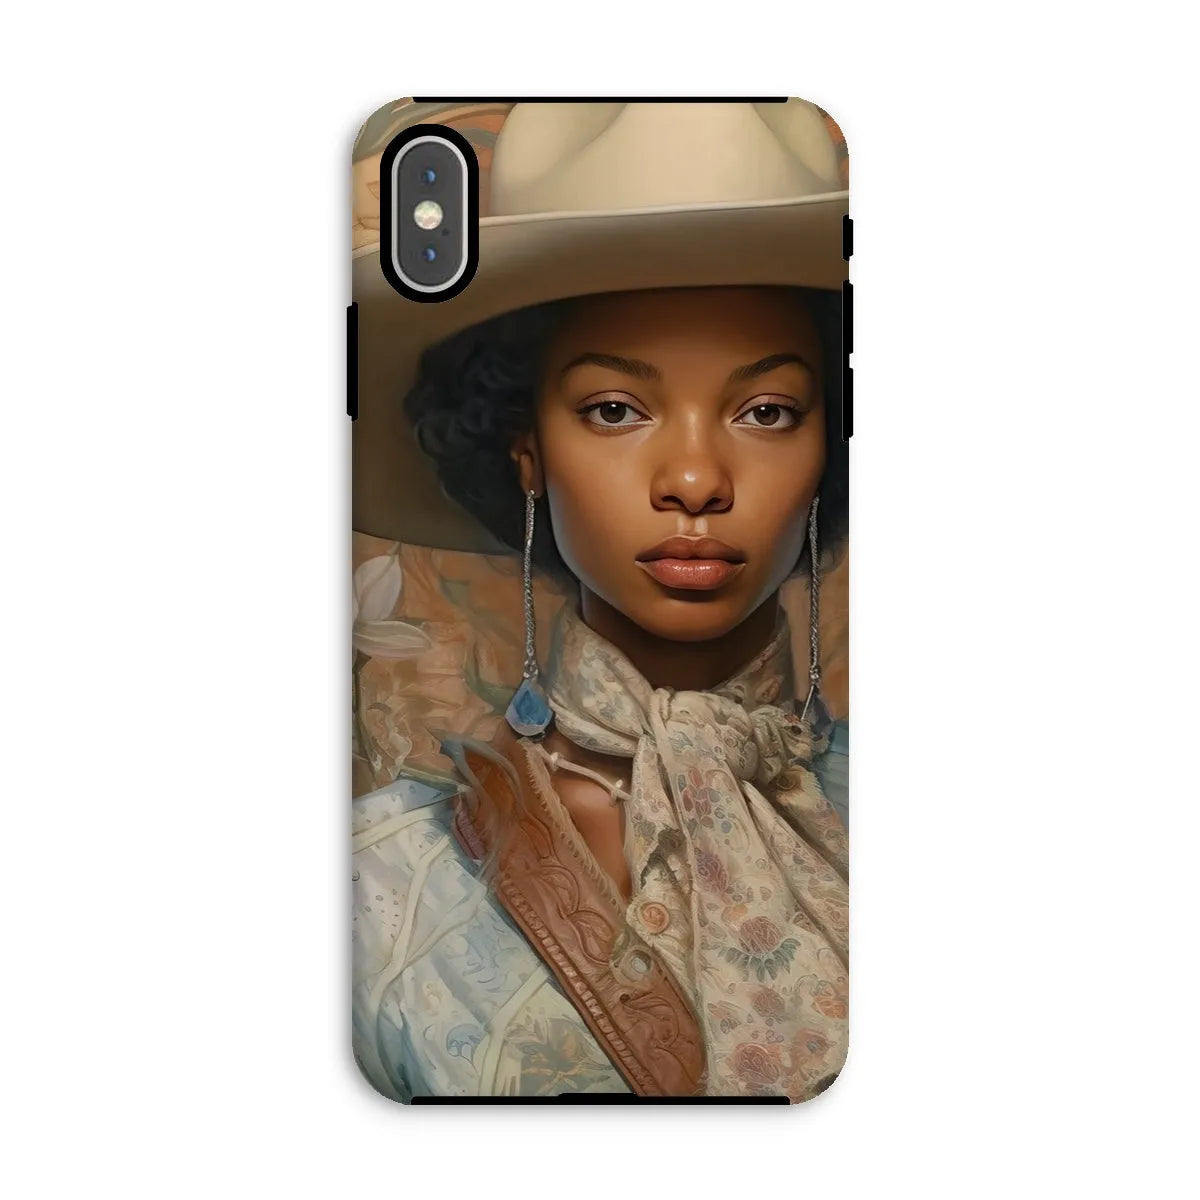 Imani The Lesbian Cowgirl - Sapphic Art Phone Case - Iphone Xs Max / Matte - Mobile Phone Cases - Aesthetic Art